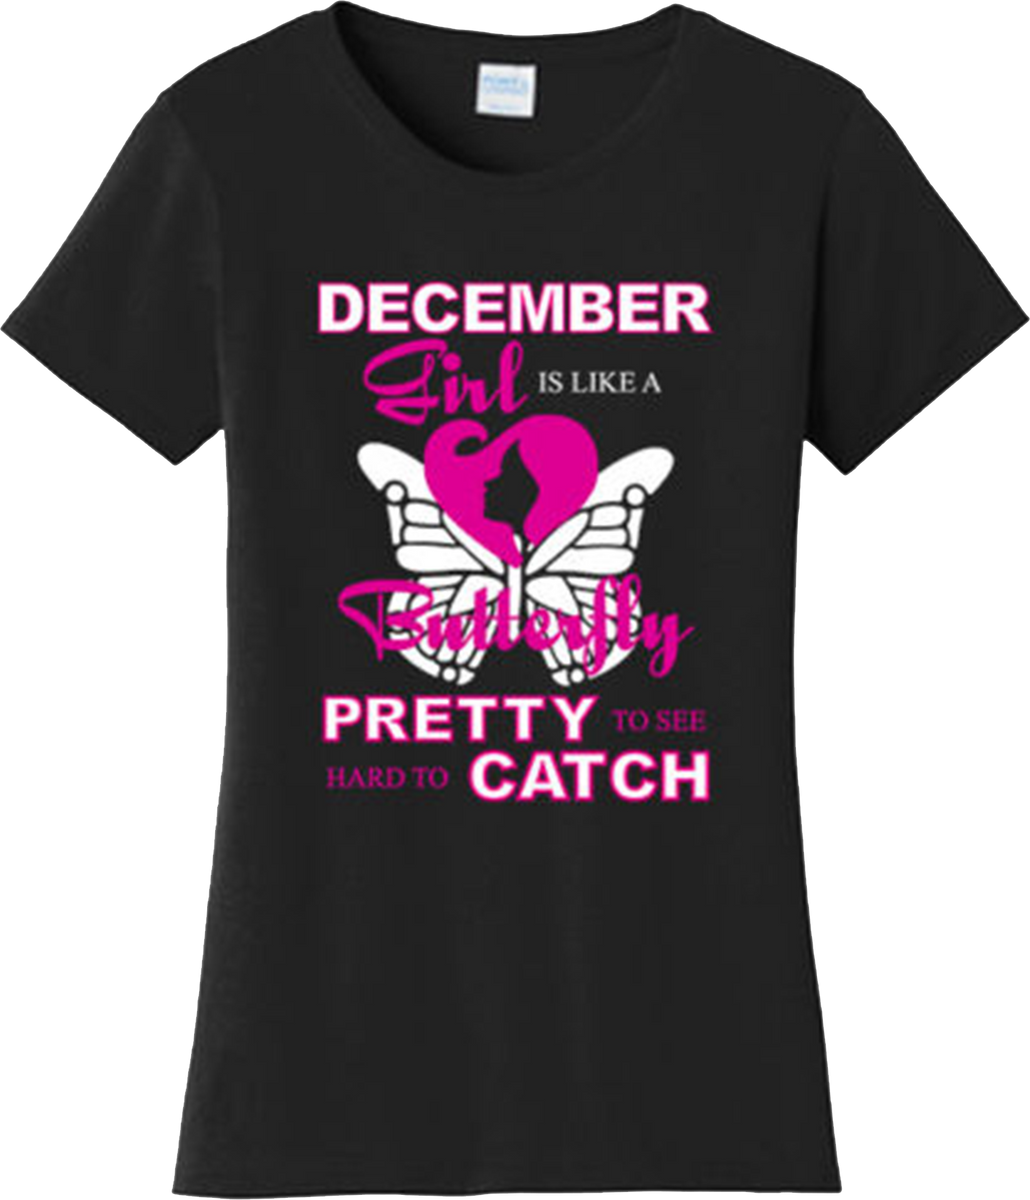 December Girl Is Like Butterfly Birthday Gift Cool T Shirt New Graphic ...